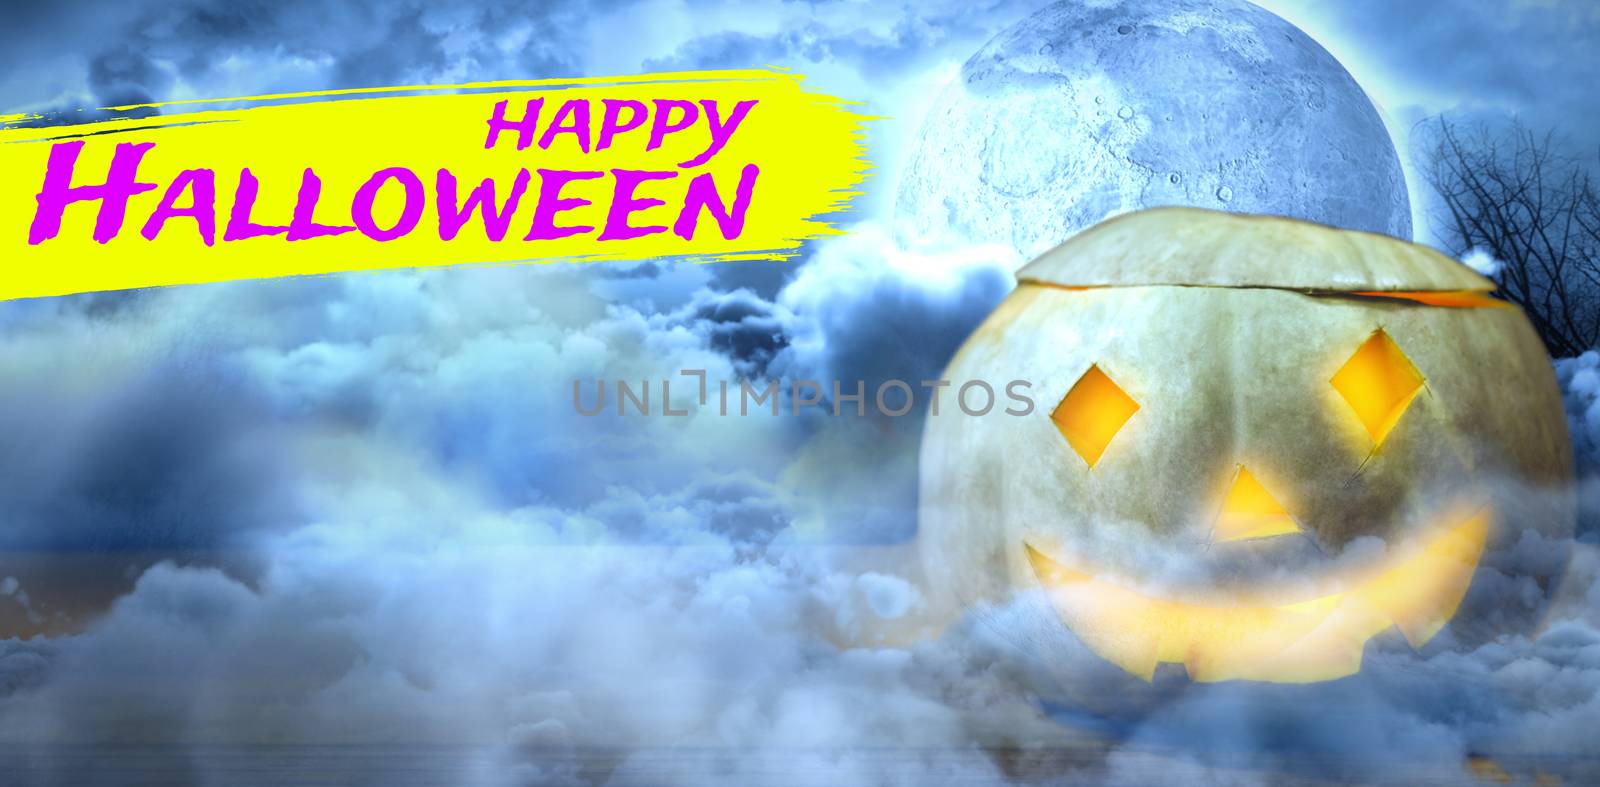 Digital image of happy Halloween text against moon lighting the water 